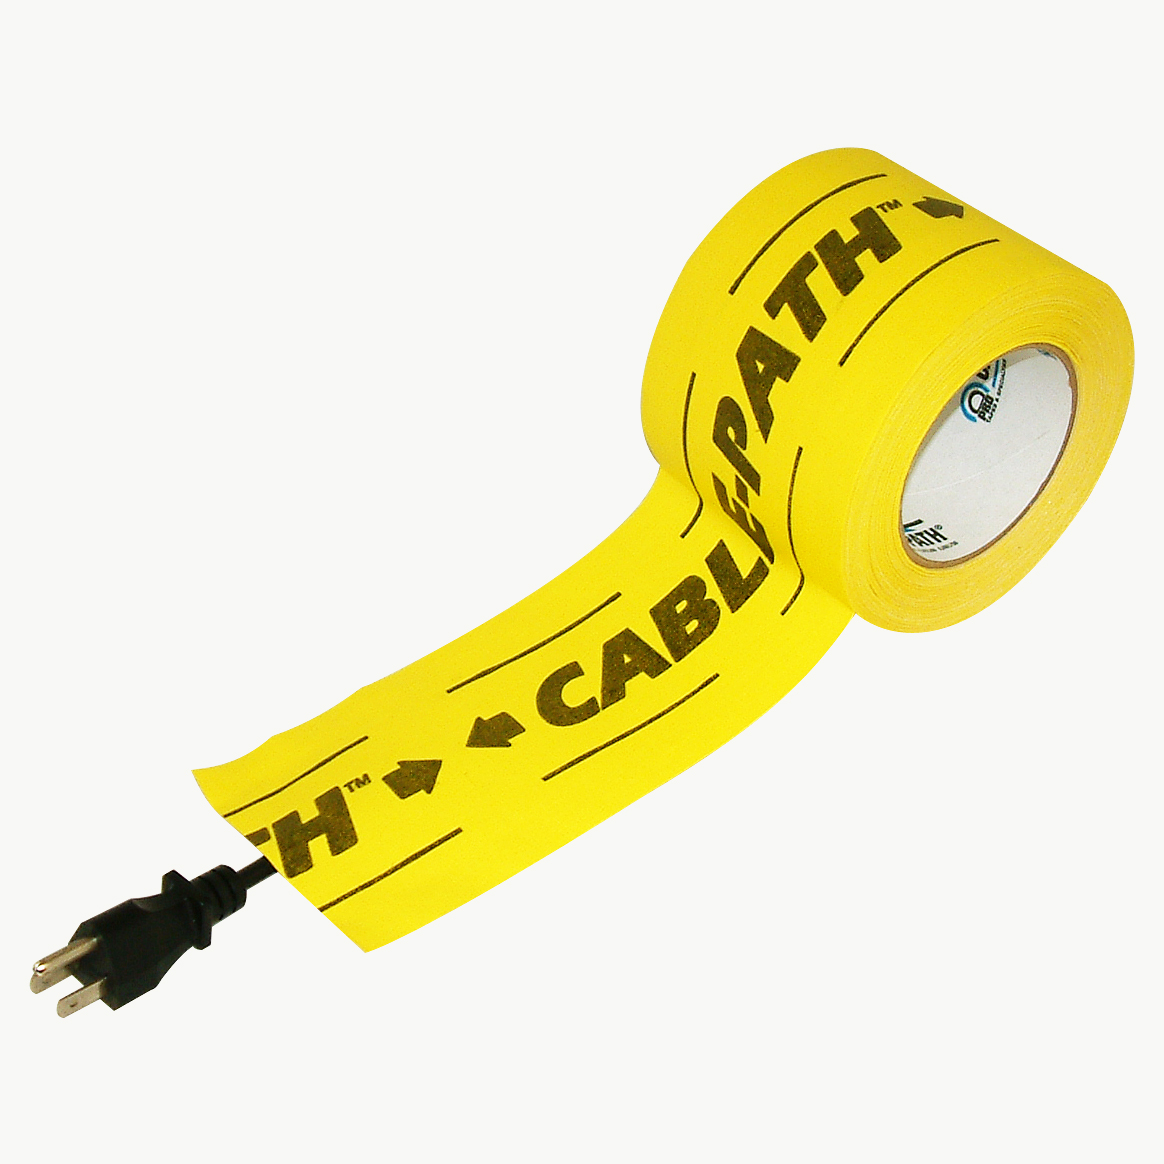 Pro Tapes Cable Path Tape